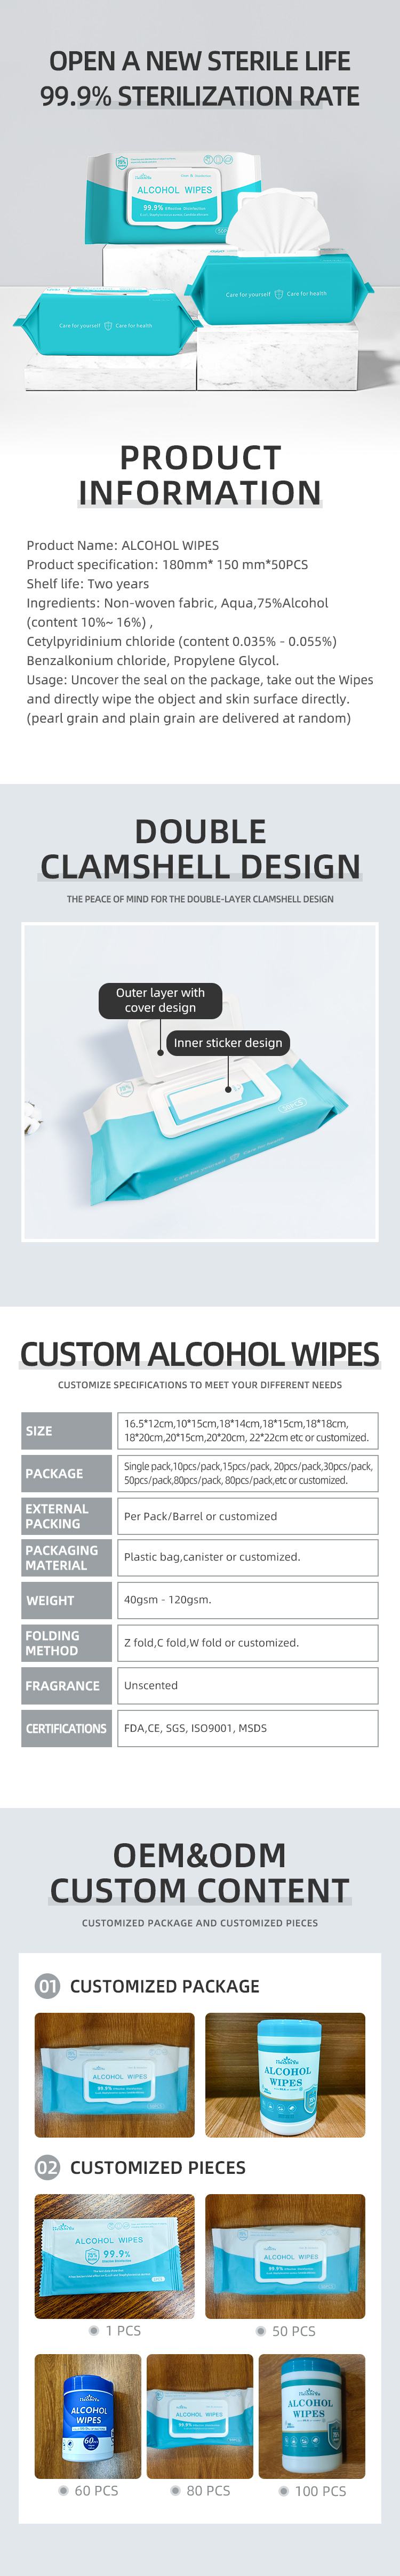 2021 Hot Sale Alcohol Wipes 75% Alcohol Kills 99.9% Of Bacteria With 50 Pieces